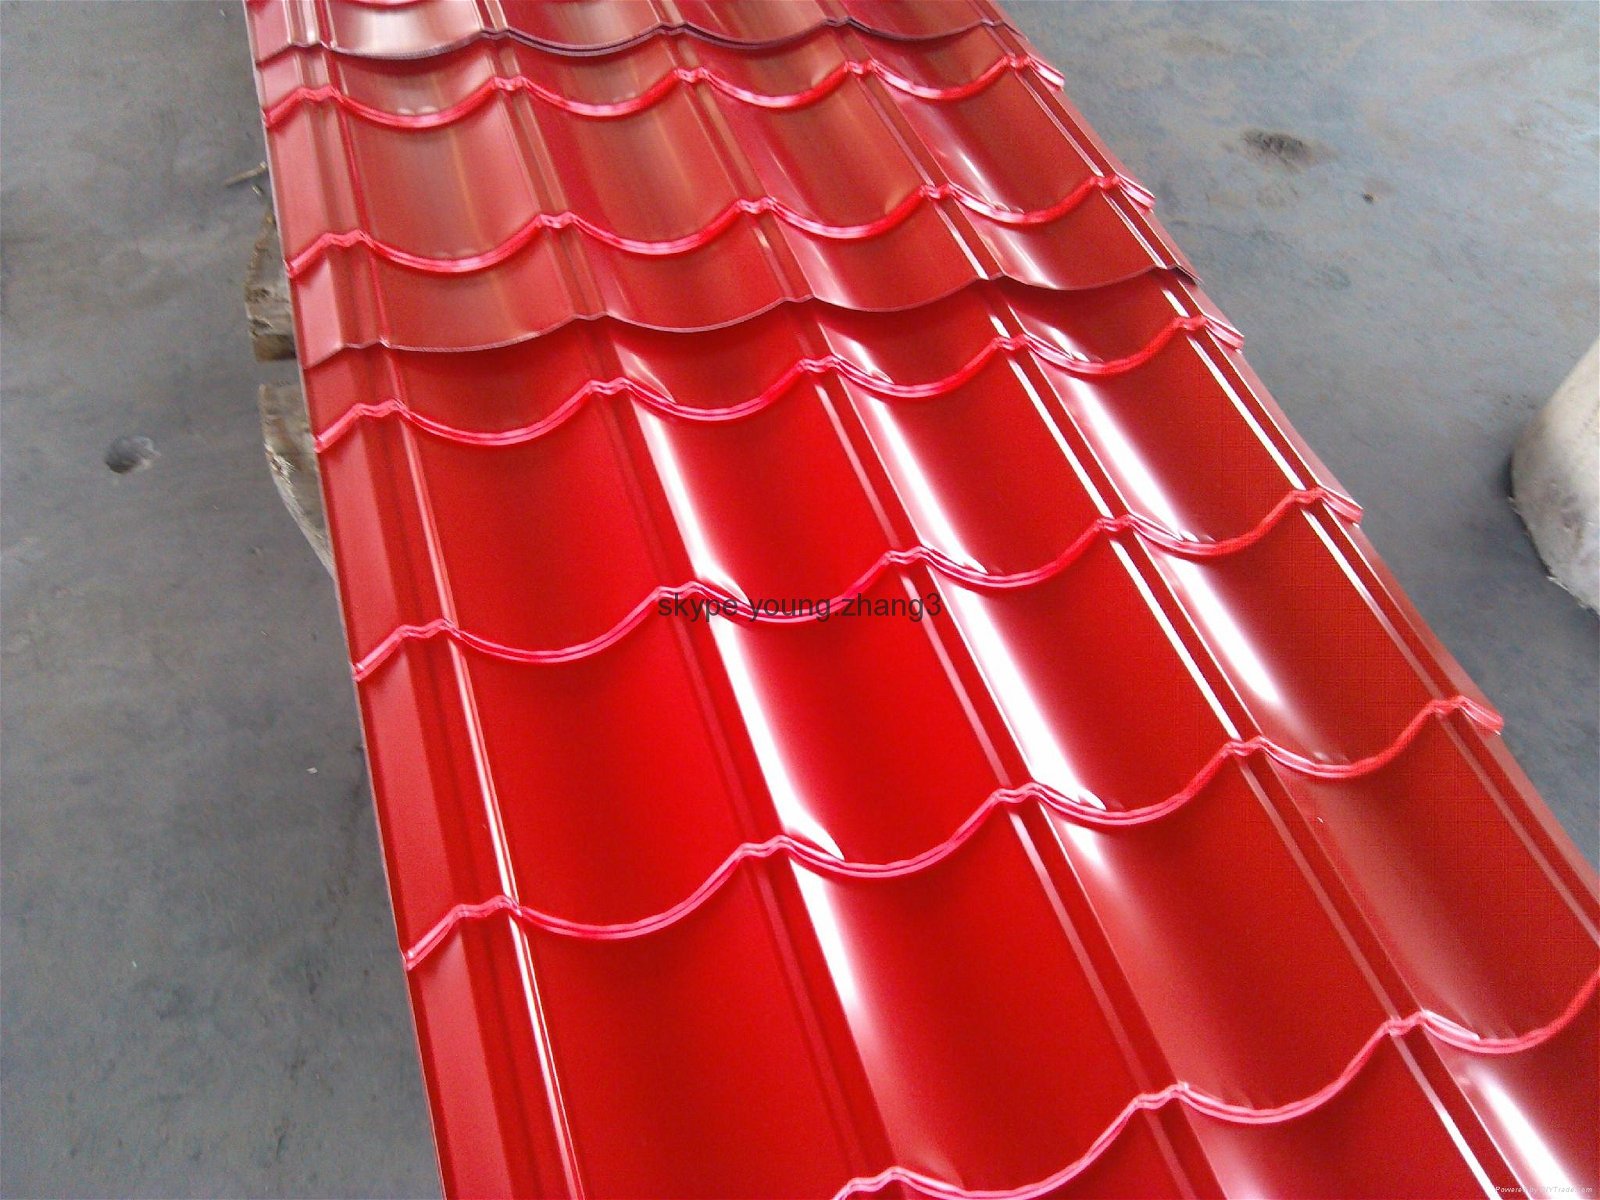 Accra Lagos house roofing sheet from China/Chinese steel profile corrugated roof 4